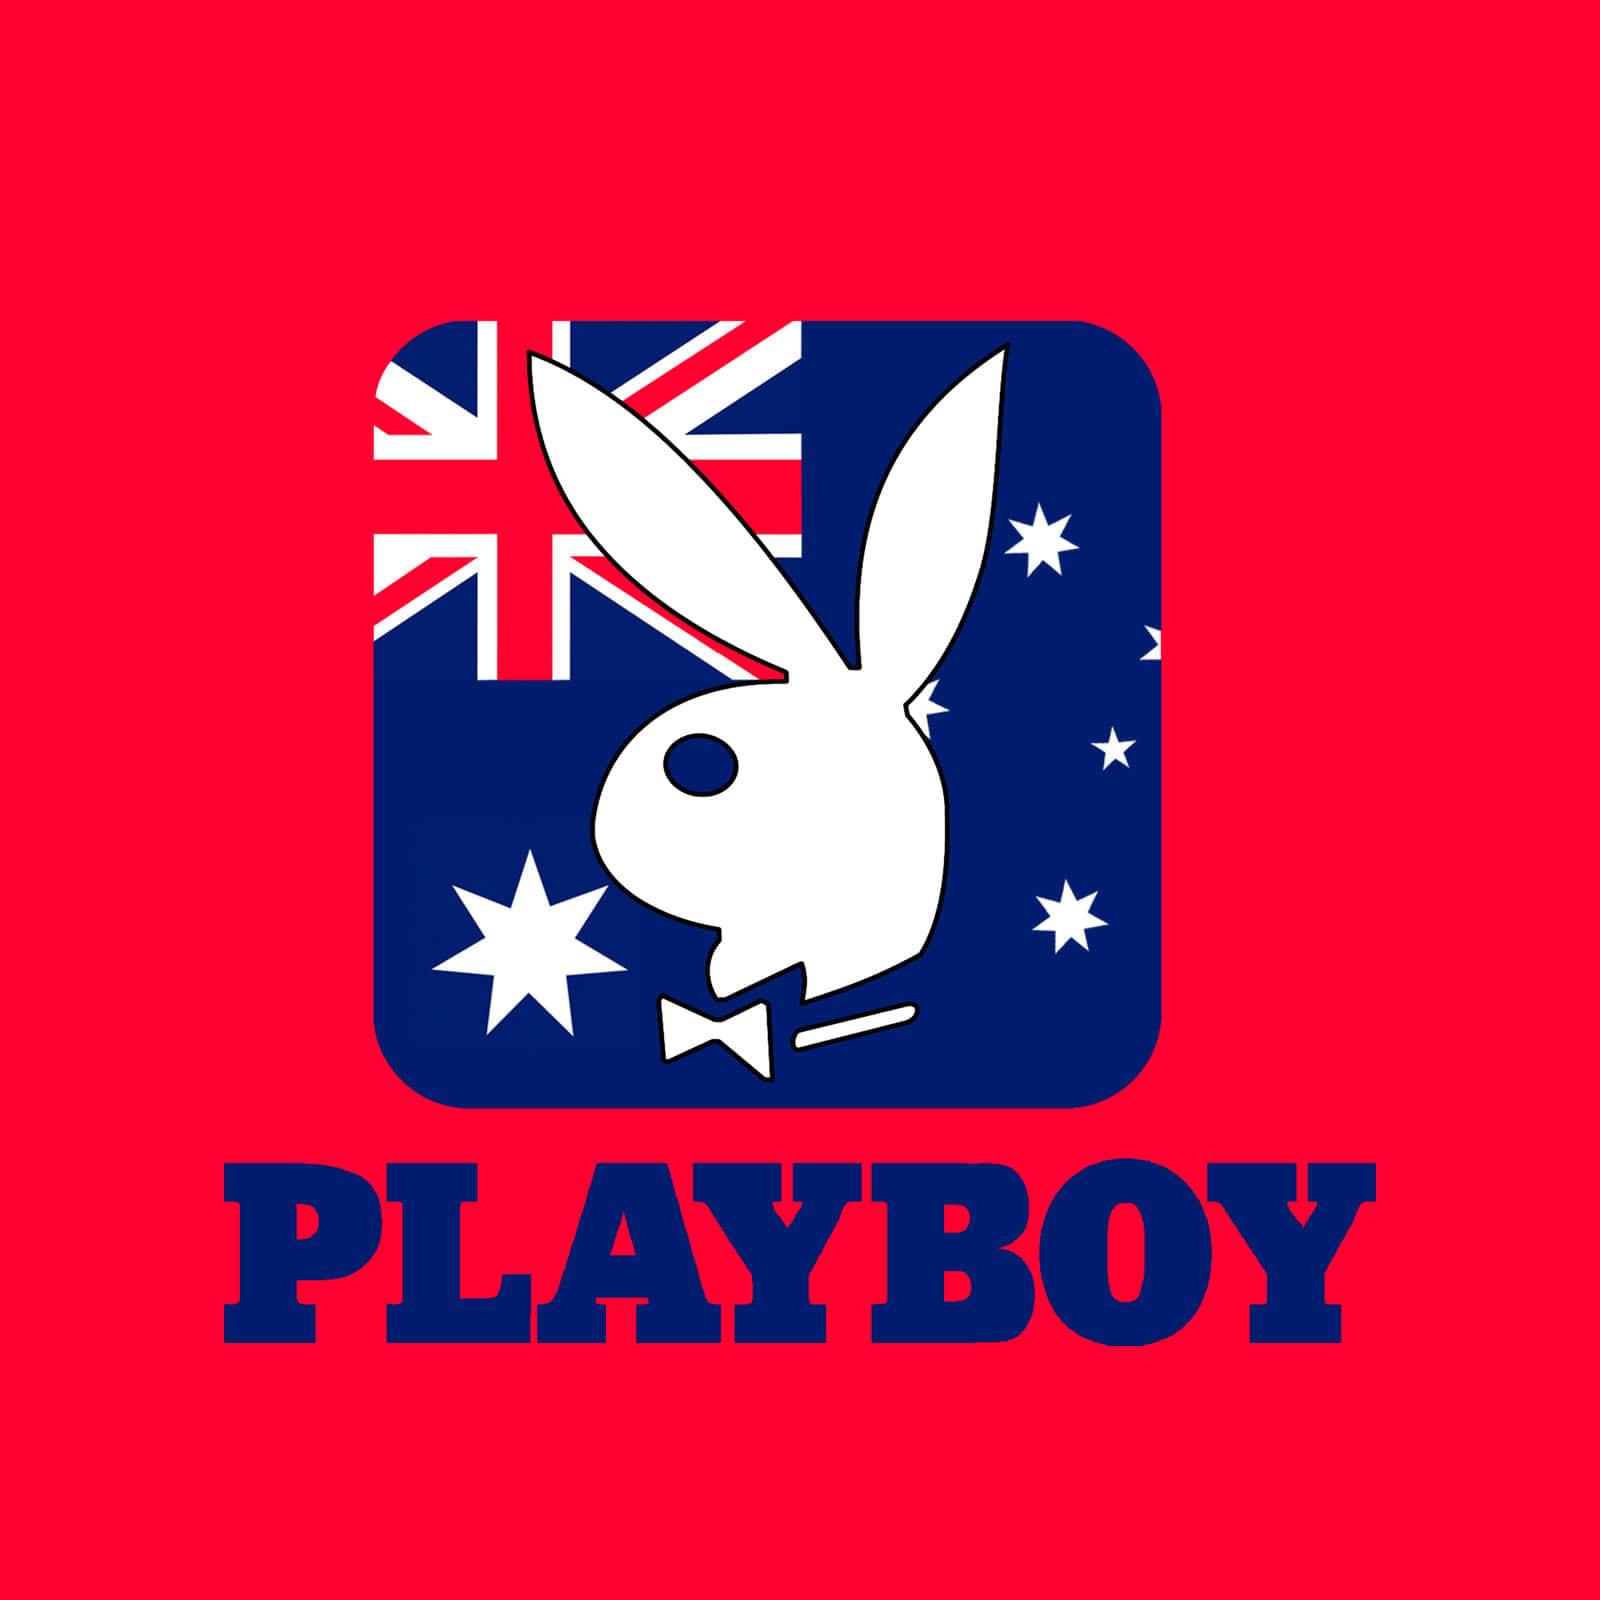 Playboy Dating: Stay fabulous, confident and connected